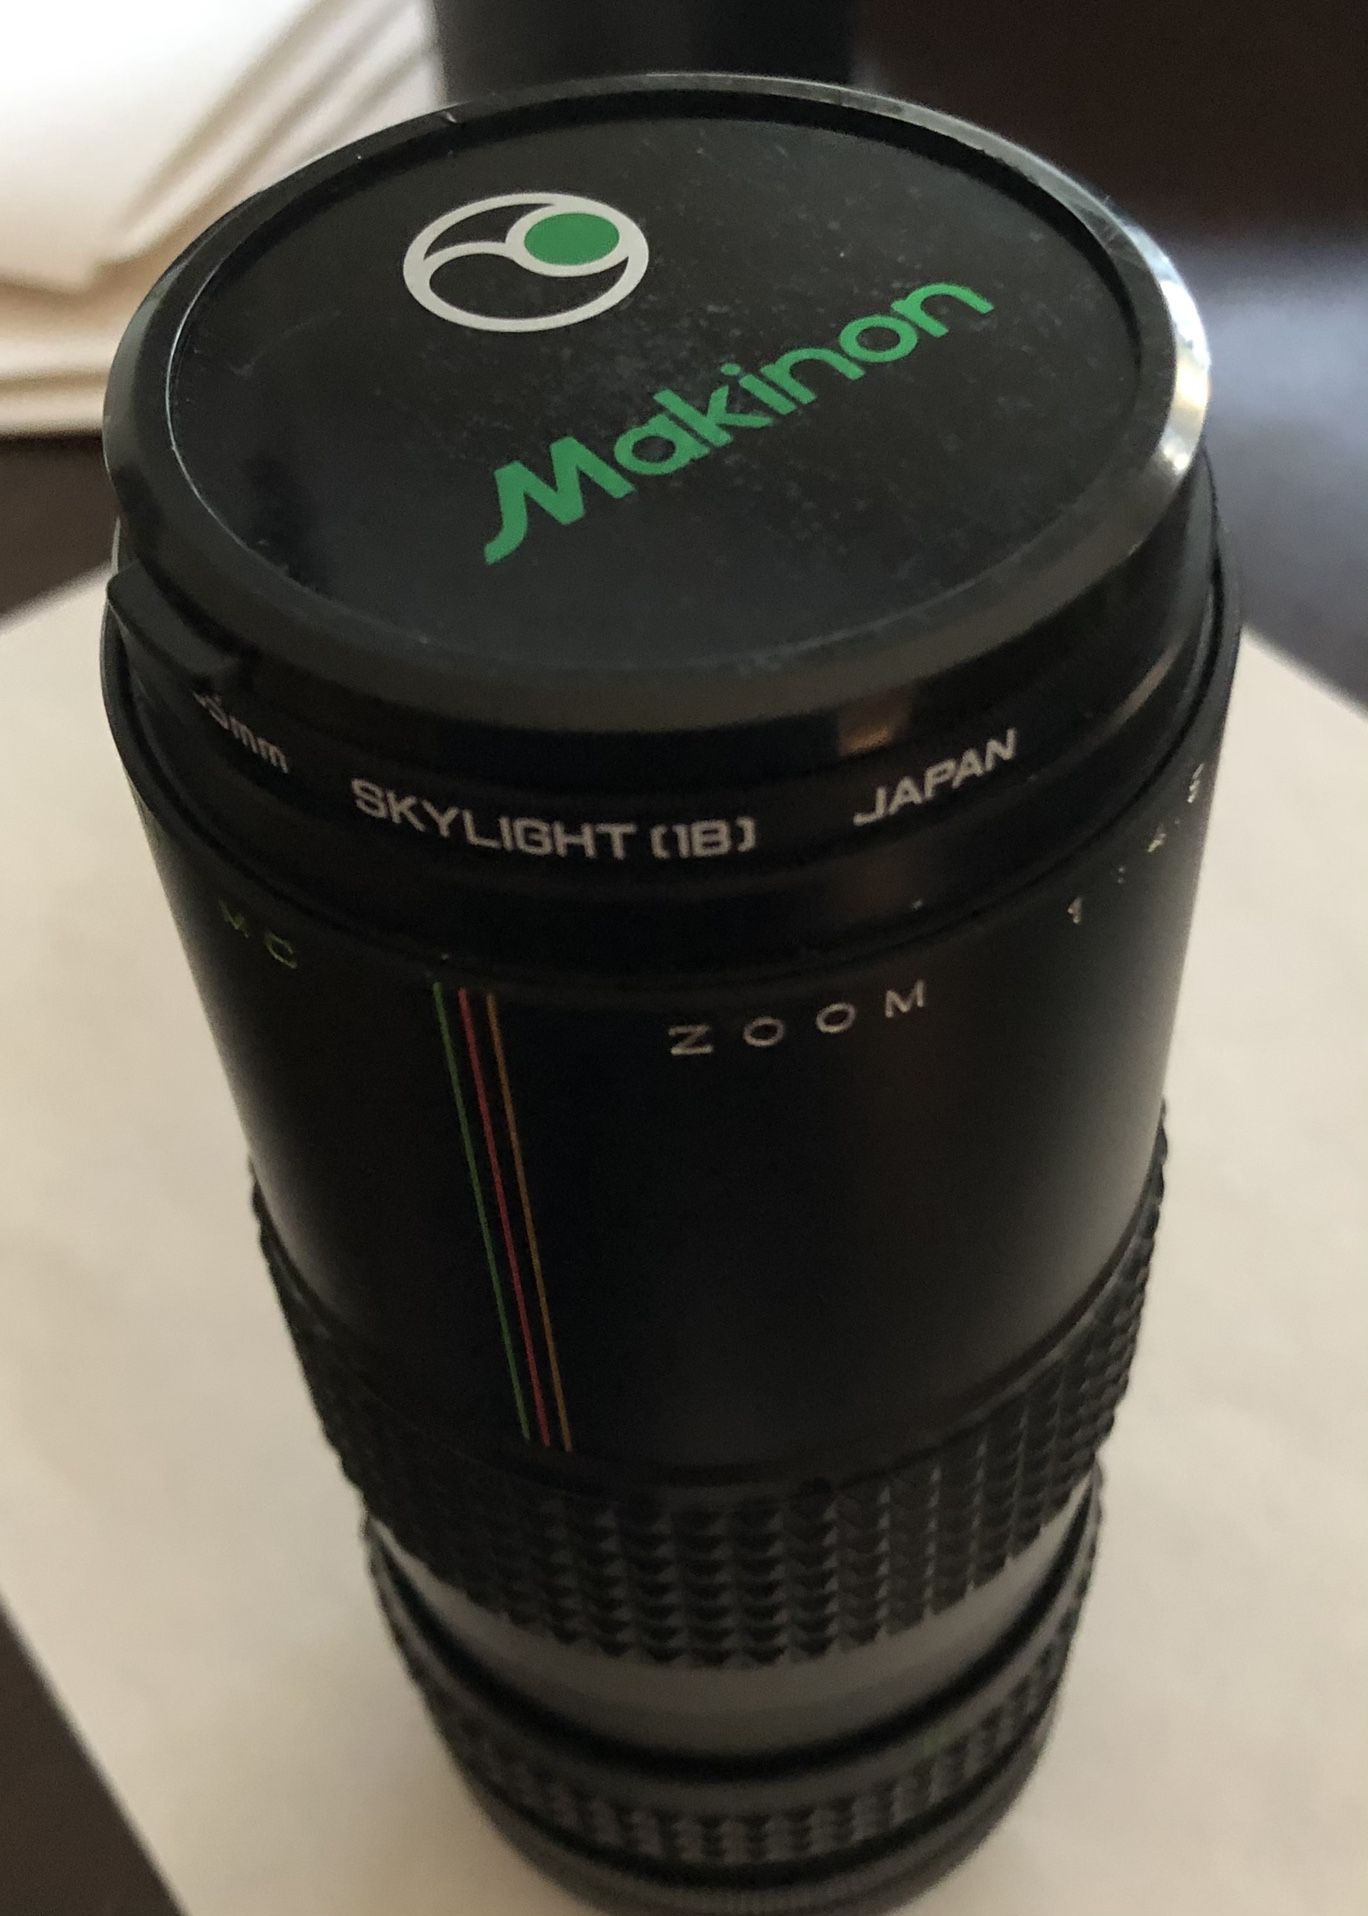 VINTAGE 1979 MAKINON MC Zoom 55 1:4.5 f=80-200mm Lens with Canon adapter and case